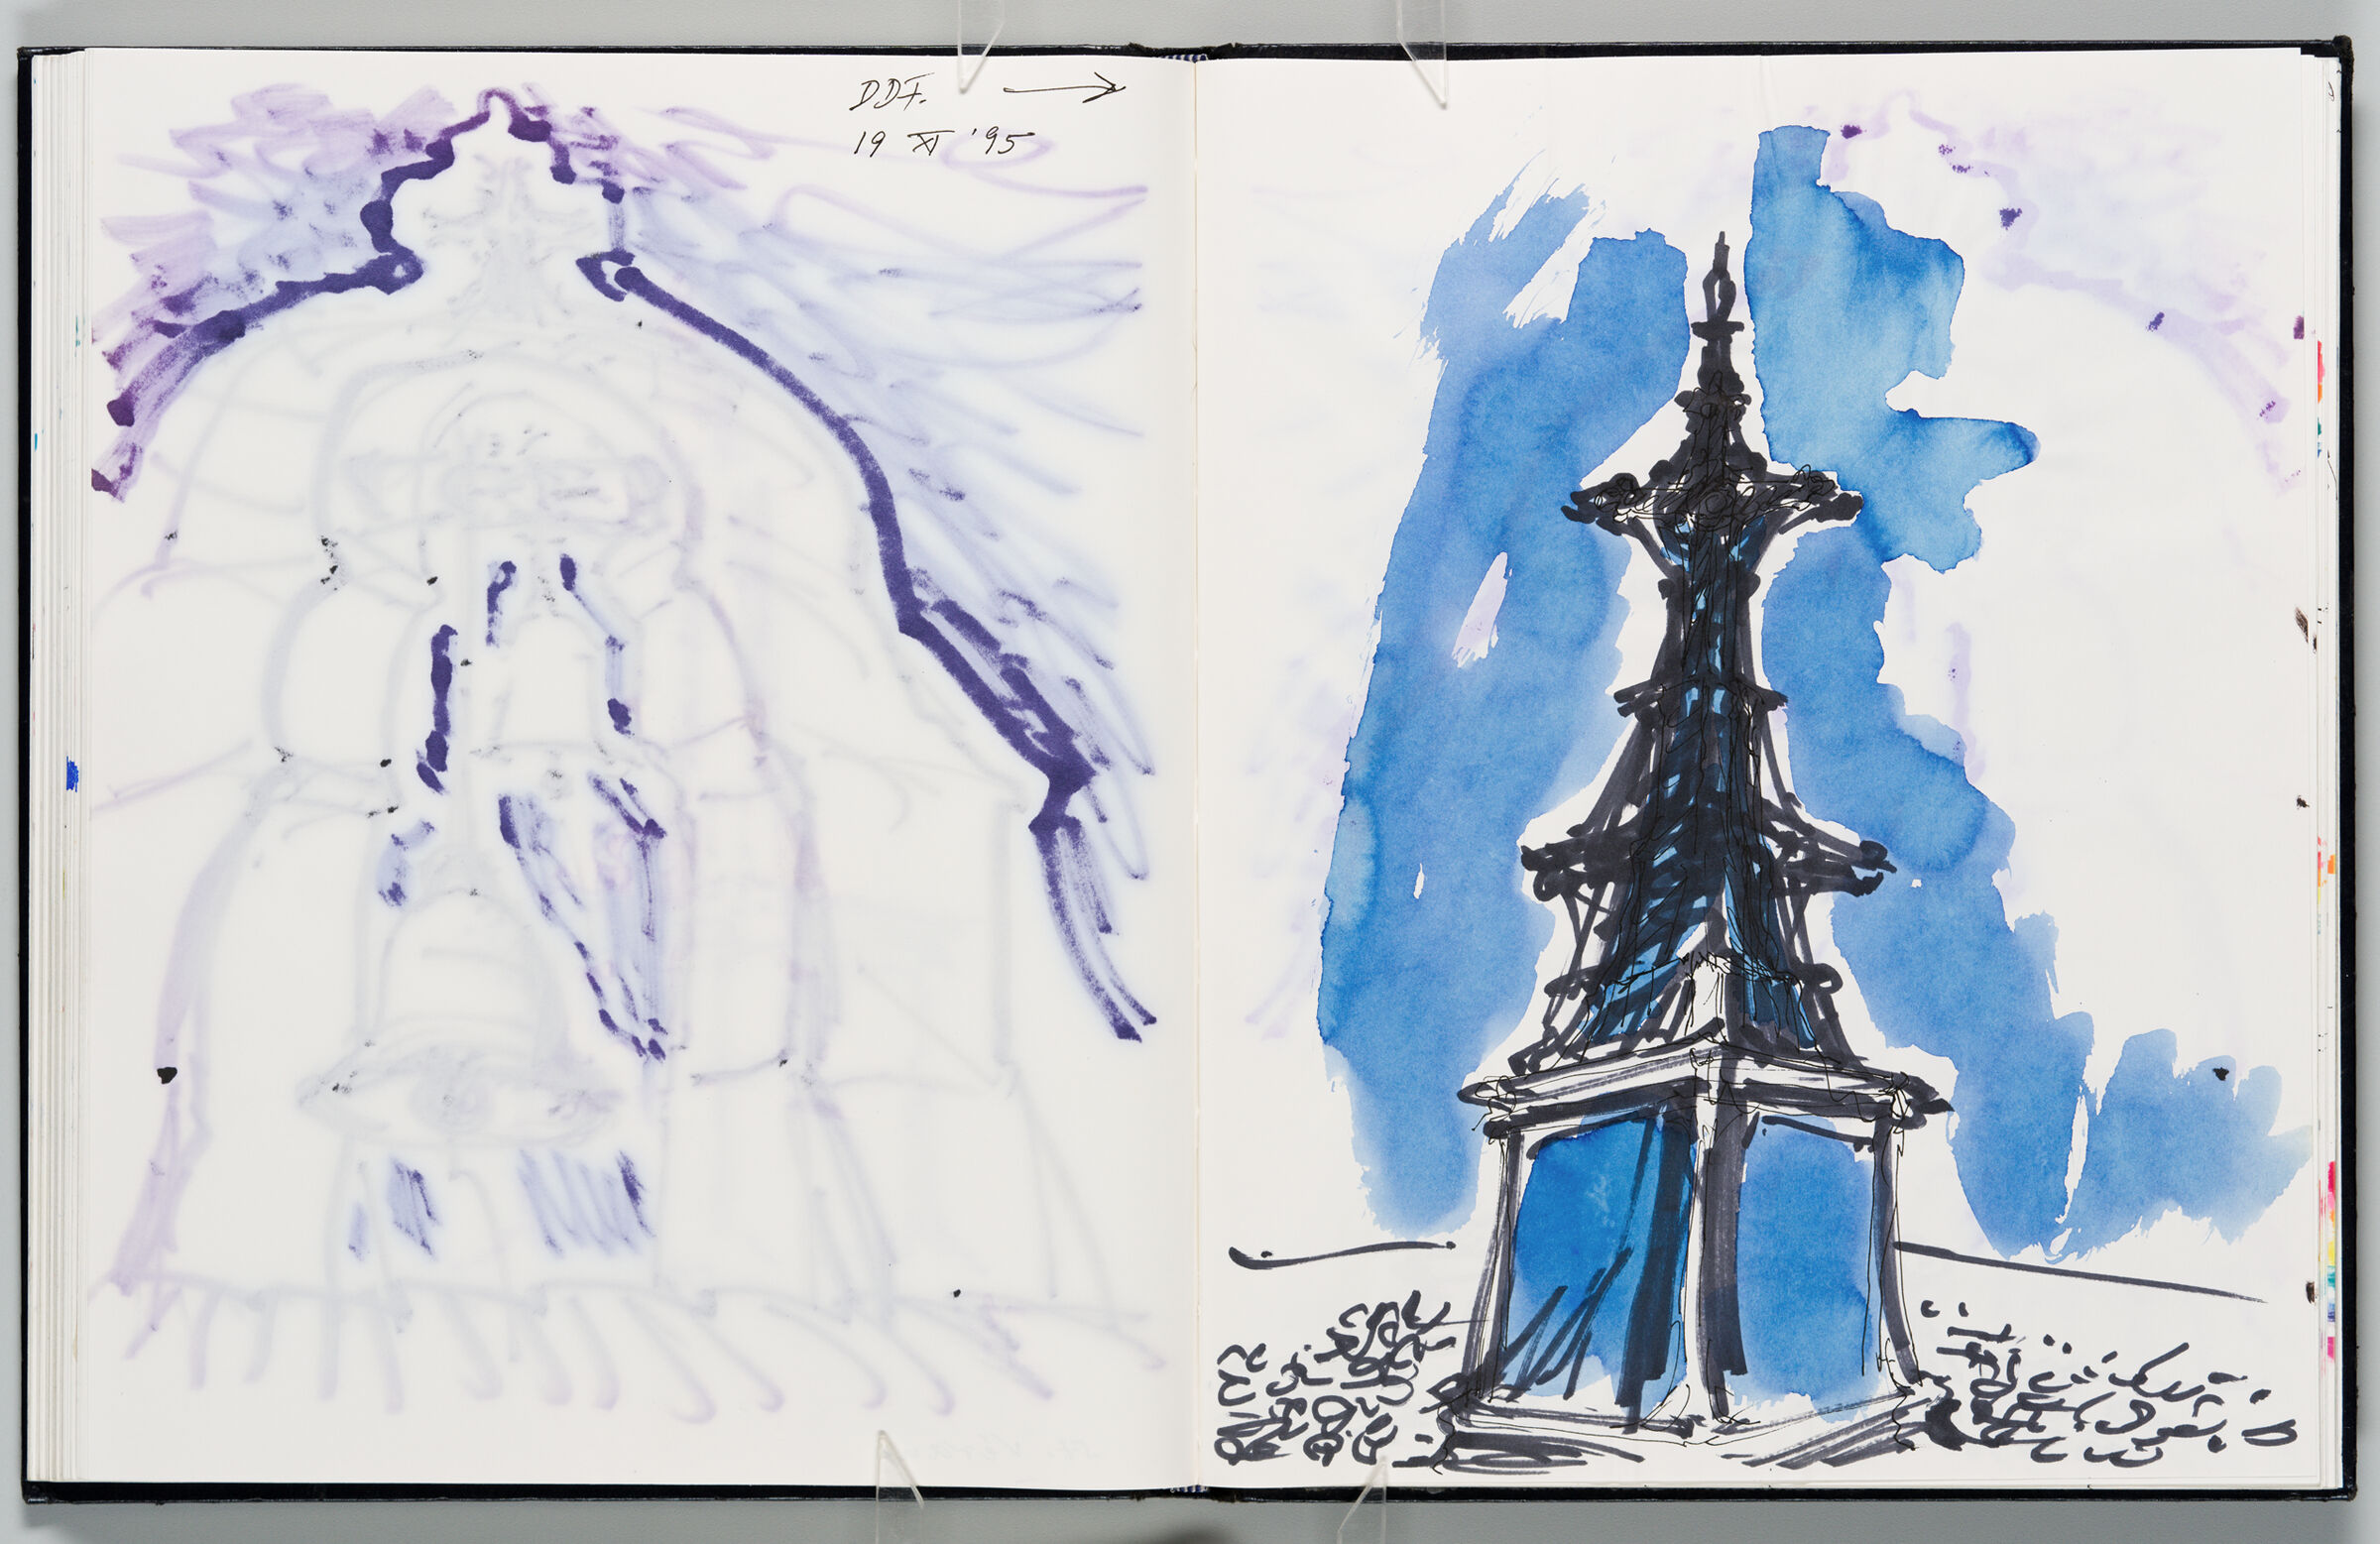 Untitled (Bleed-Through Of Previous Page, Left Page); Untitled (St. Véran With Color Transfer, Right Page)